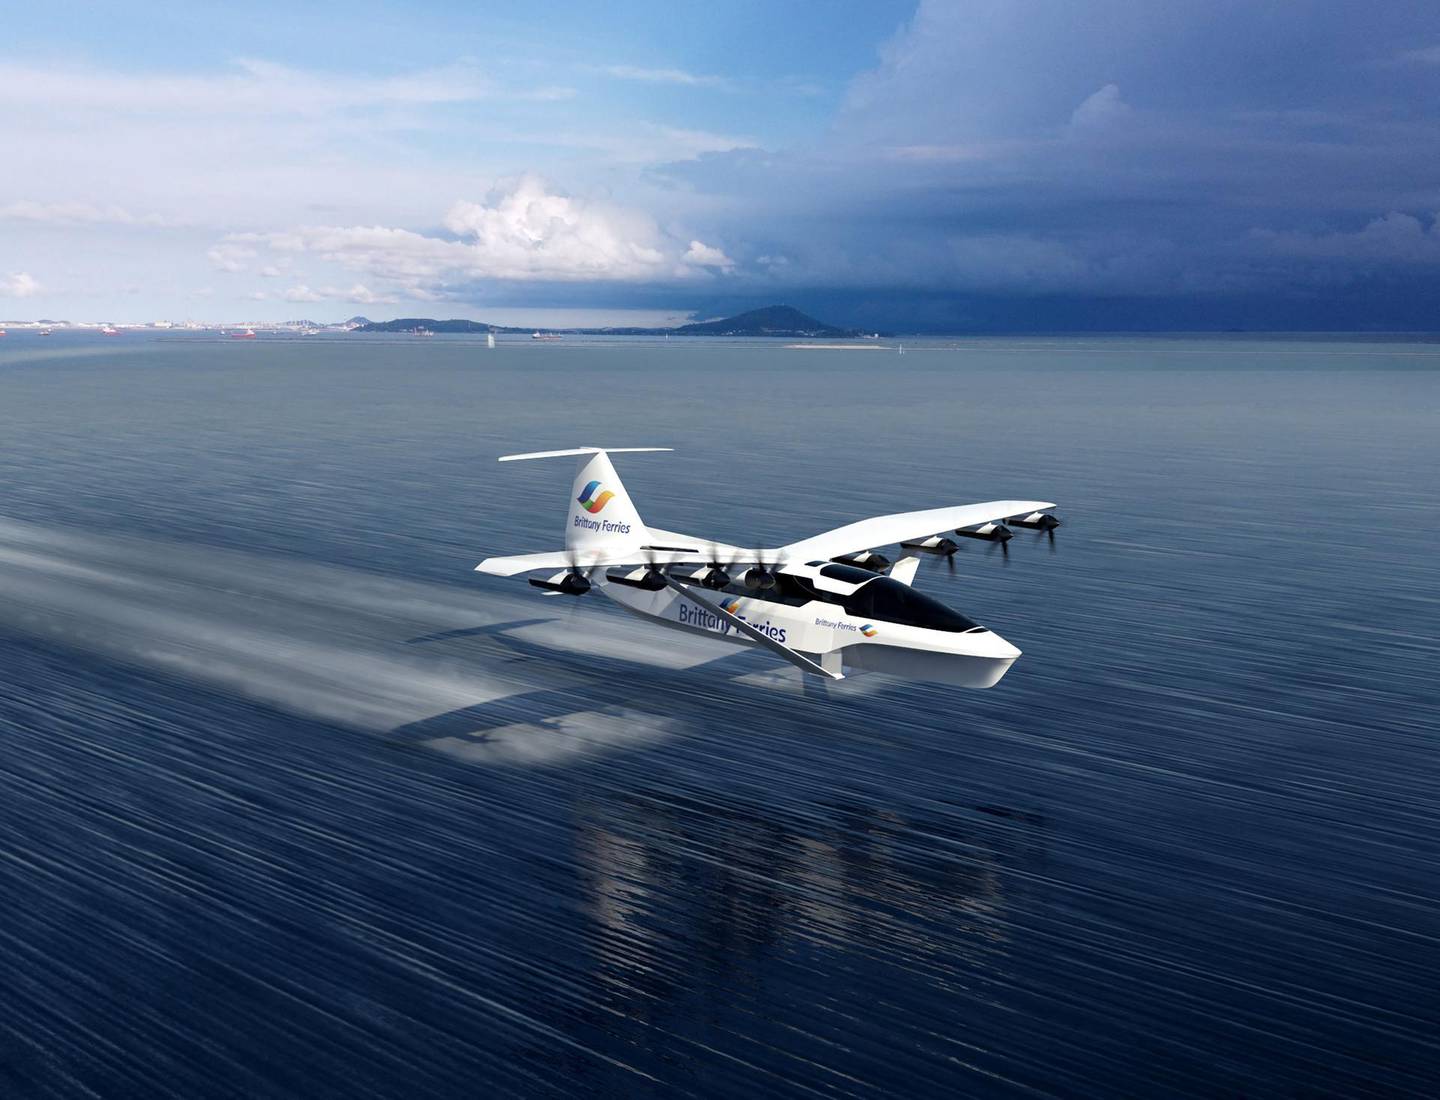 A handout picture released by Regent - Brittany Ferries company on June 12, 2021, shows an artist concept depicting the Seaglider, a 100% electric flying boat created by the US REGENT (Regional Electric Ground Effect Nautical Transport) start-up based in Boston. Brittany Ferries signed a partner agreement to participate in the development of the Seagliders which will welcome from 50 to 150 passengers for trips between Great Britain and France within 2028. - RESTRICTED TO EDITORIAL USE - MANDATORY CREDIT "AFP PHOTO / REGENT - BRITTANY FERRIES " - NO MARKETING - NO ADVERTISING CAMPAIGNS - DISTRIBUTED AS A SERVICE TO CLIENTS
 / AFP / REGENT - BRITTANY FERRIES / STR / RESTRICTED TO EDITORIAL USE - MANDATORY CREDIT "AFP PHOTO / REGENT - BRITTANY FERRIES " - NO MARKETING - NO ADVERTISING CAMPAIGNS - DISTRIBUTED AS A SERVICE TO CLIENTS
